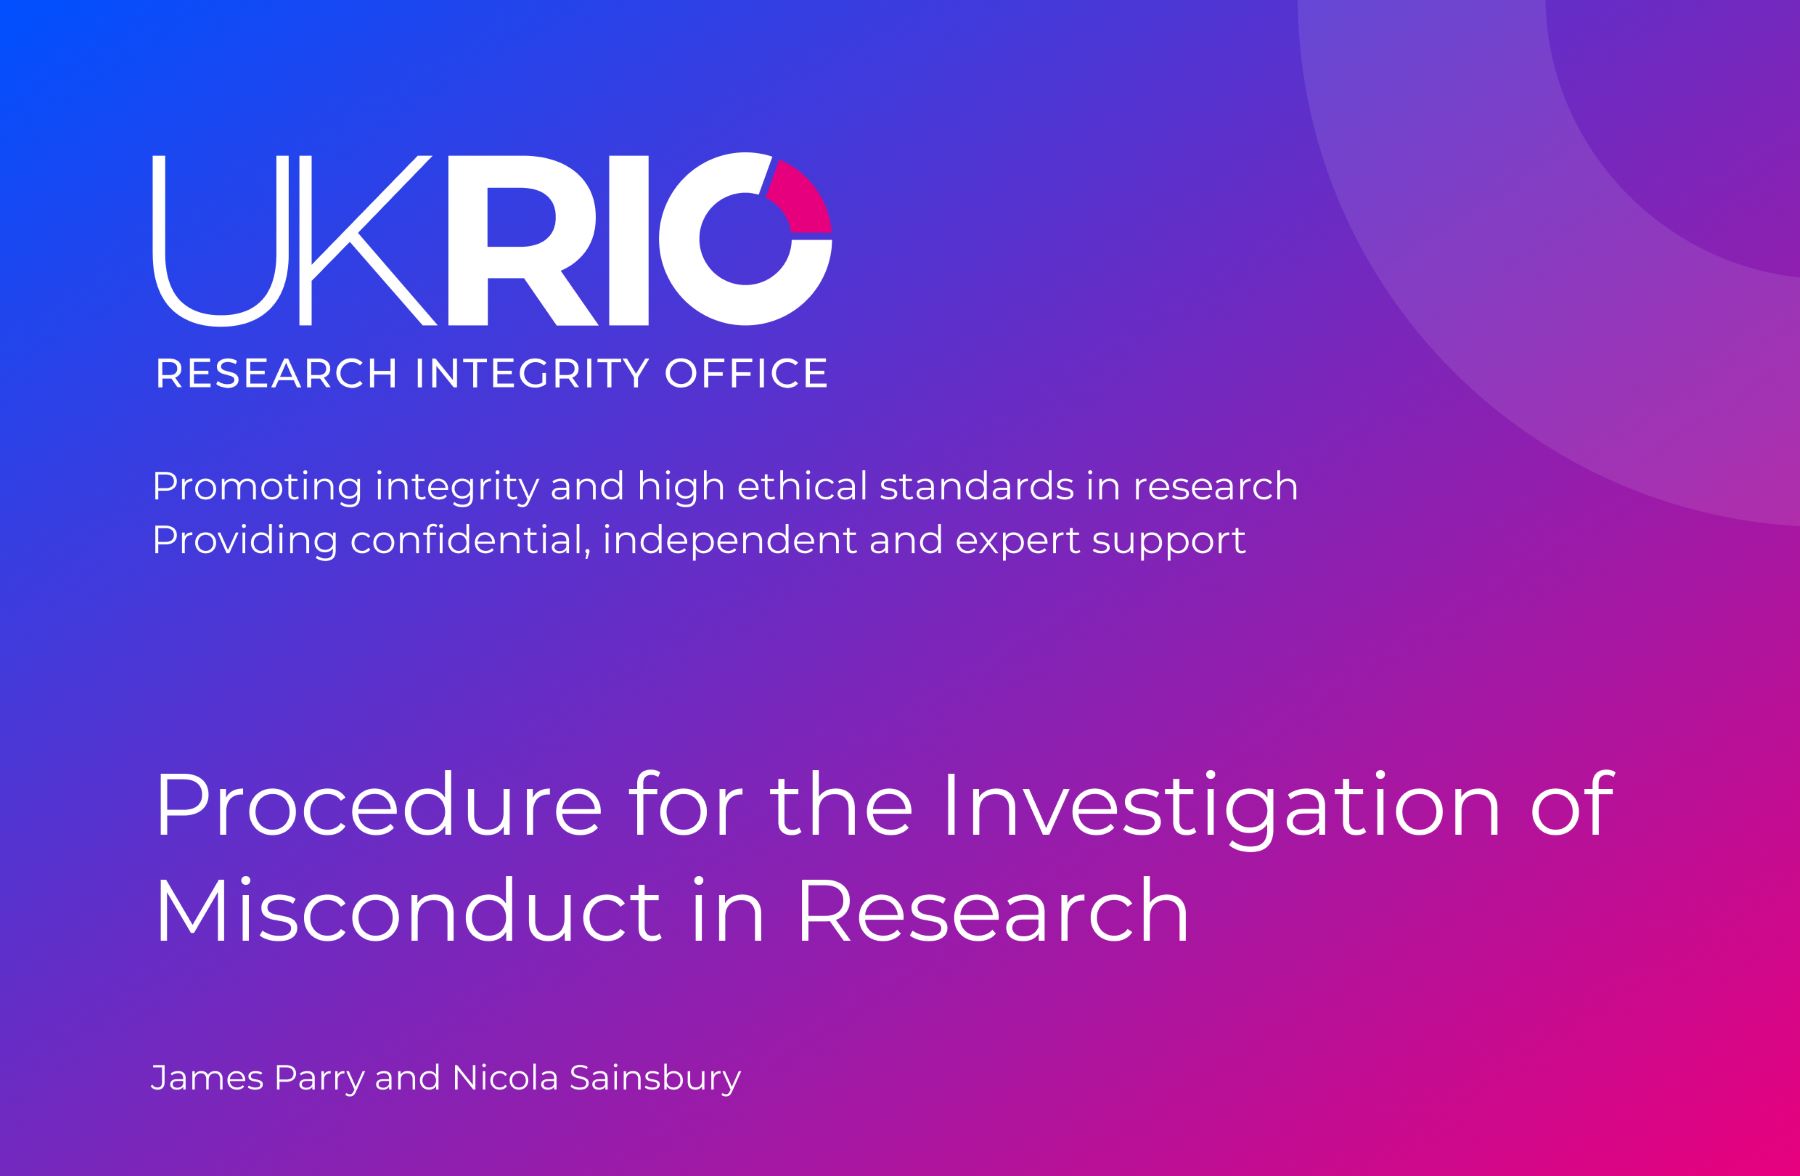 Launch of new research misconduct investigation procedure